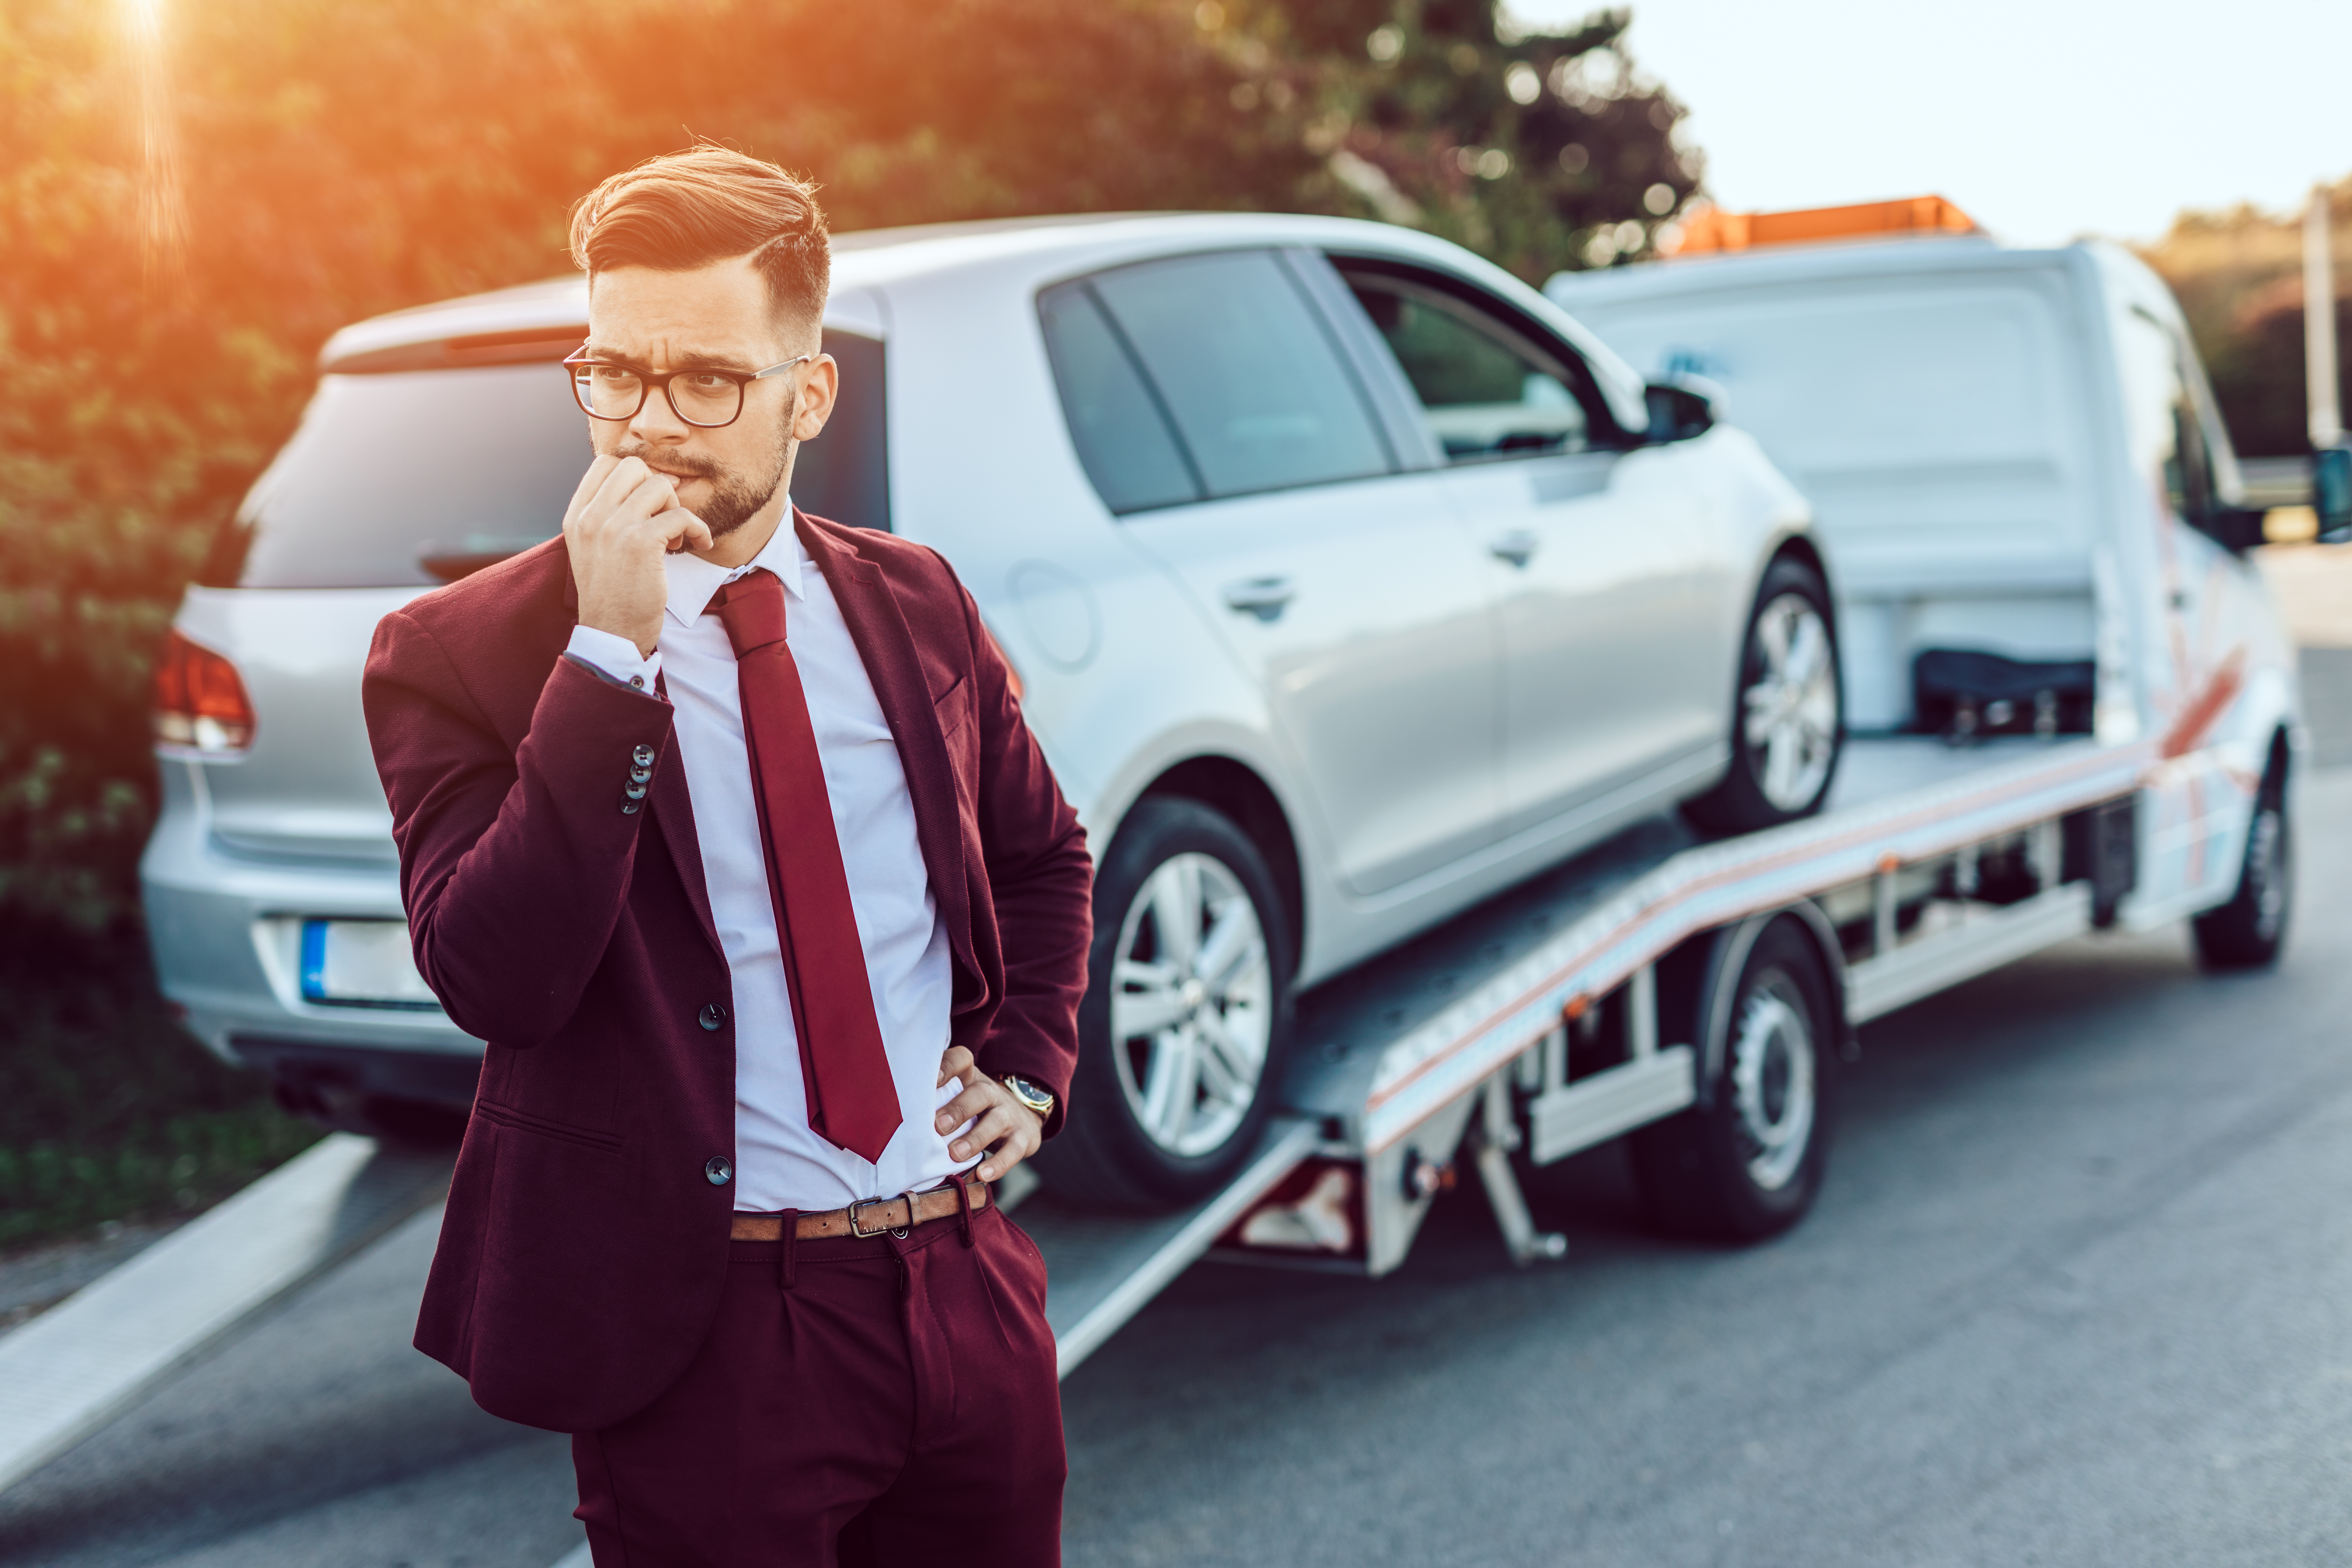 Vehicle Replacement Insurance